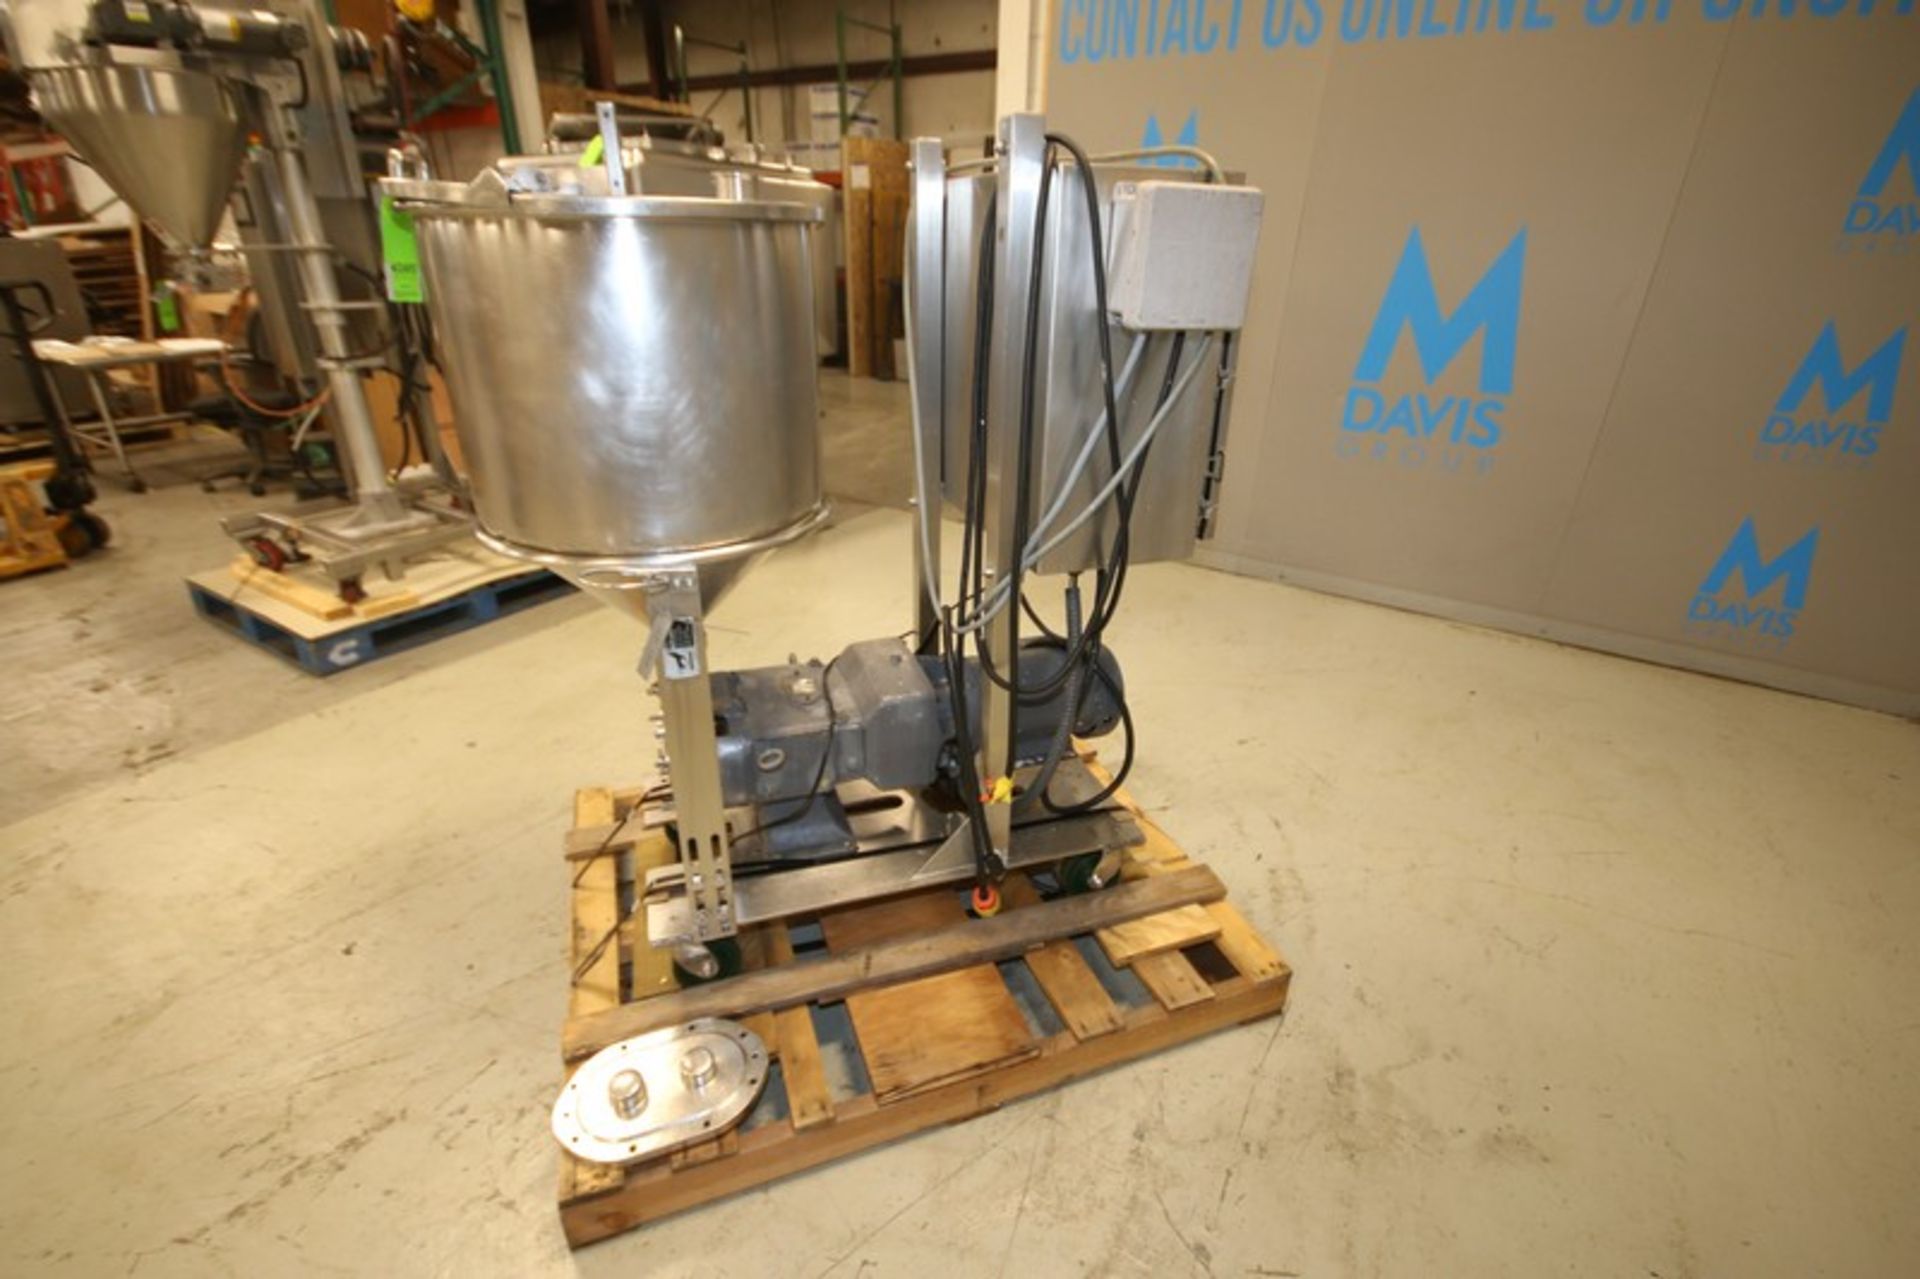 Waukesha Portable Positive Displacement Pump, Model 060, SN 271655 with 2.5 L CT Head, Baldor 5 hp / - Image 4 of 10